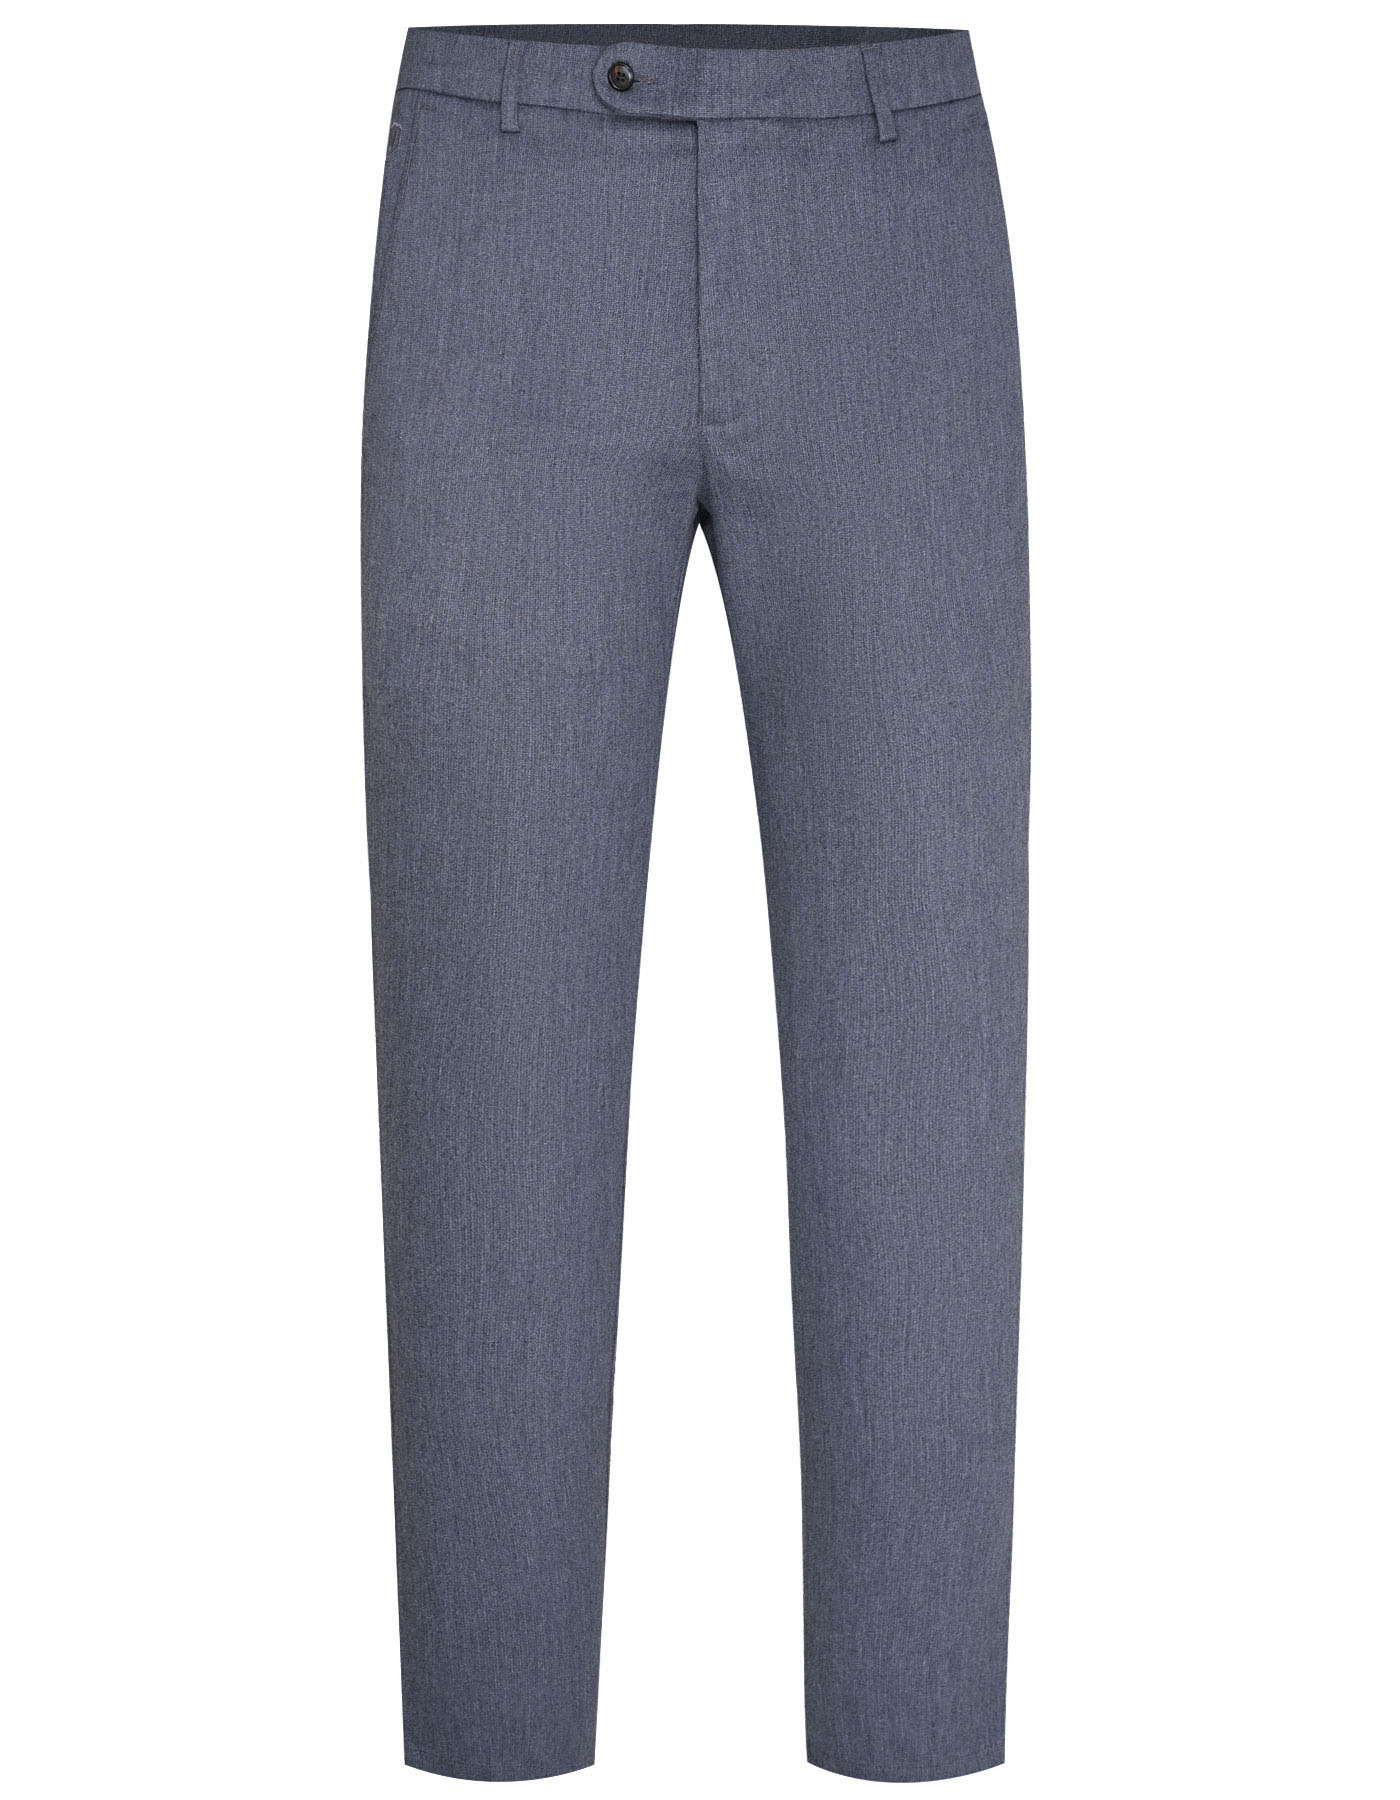 Mens Chinos Pants online Shopping in Pakistan